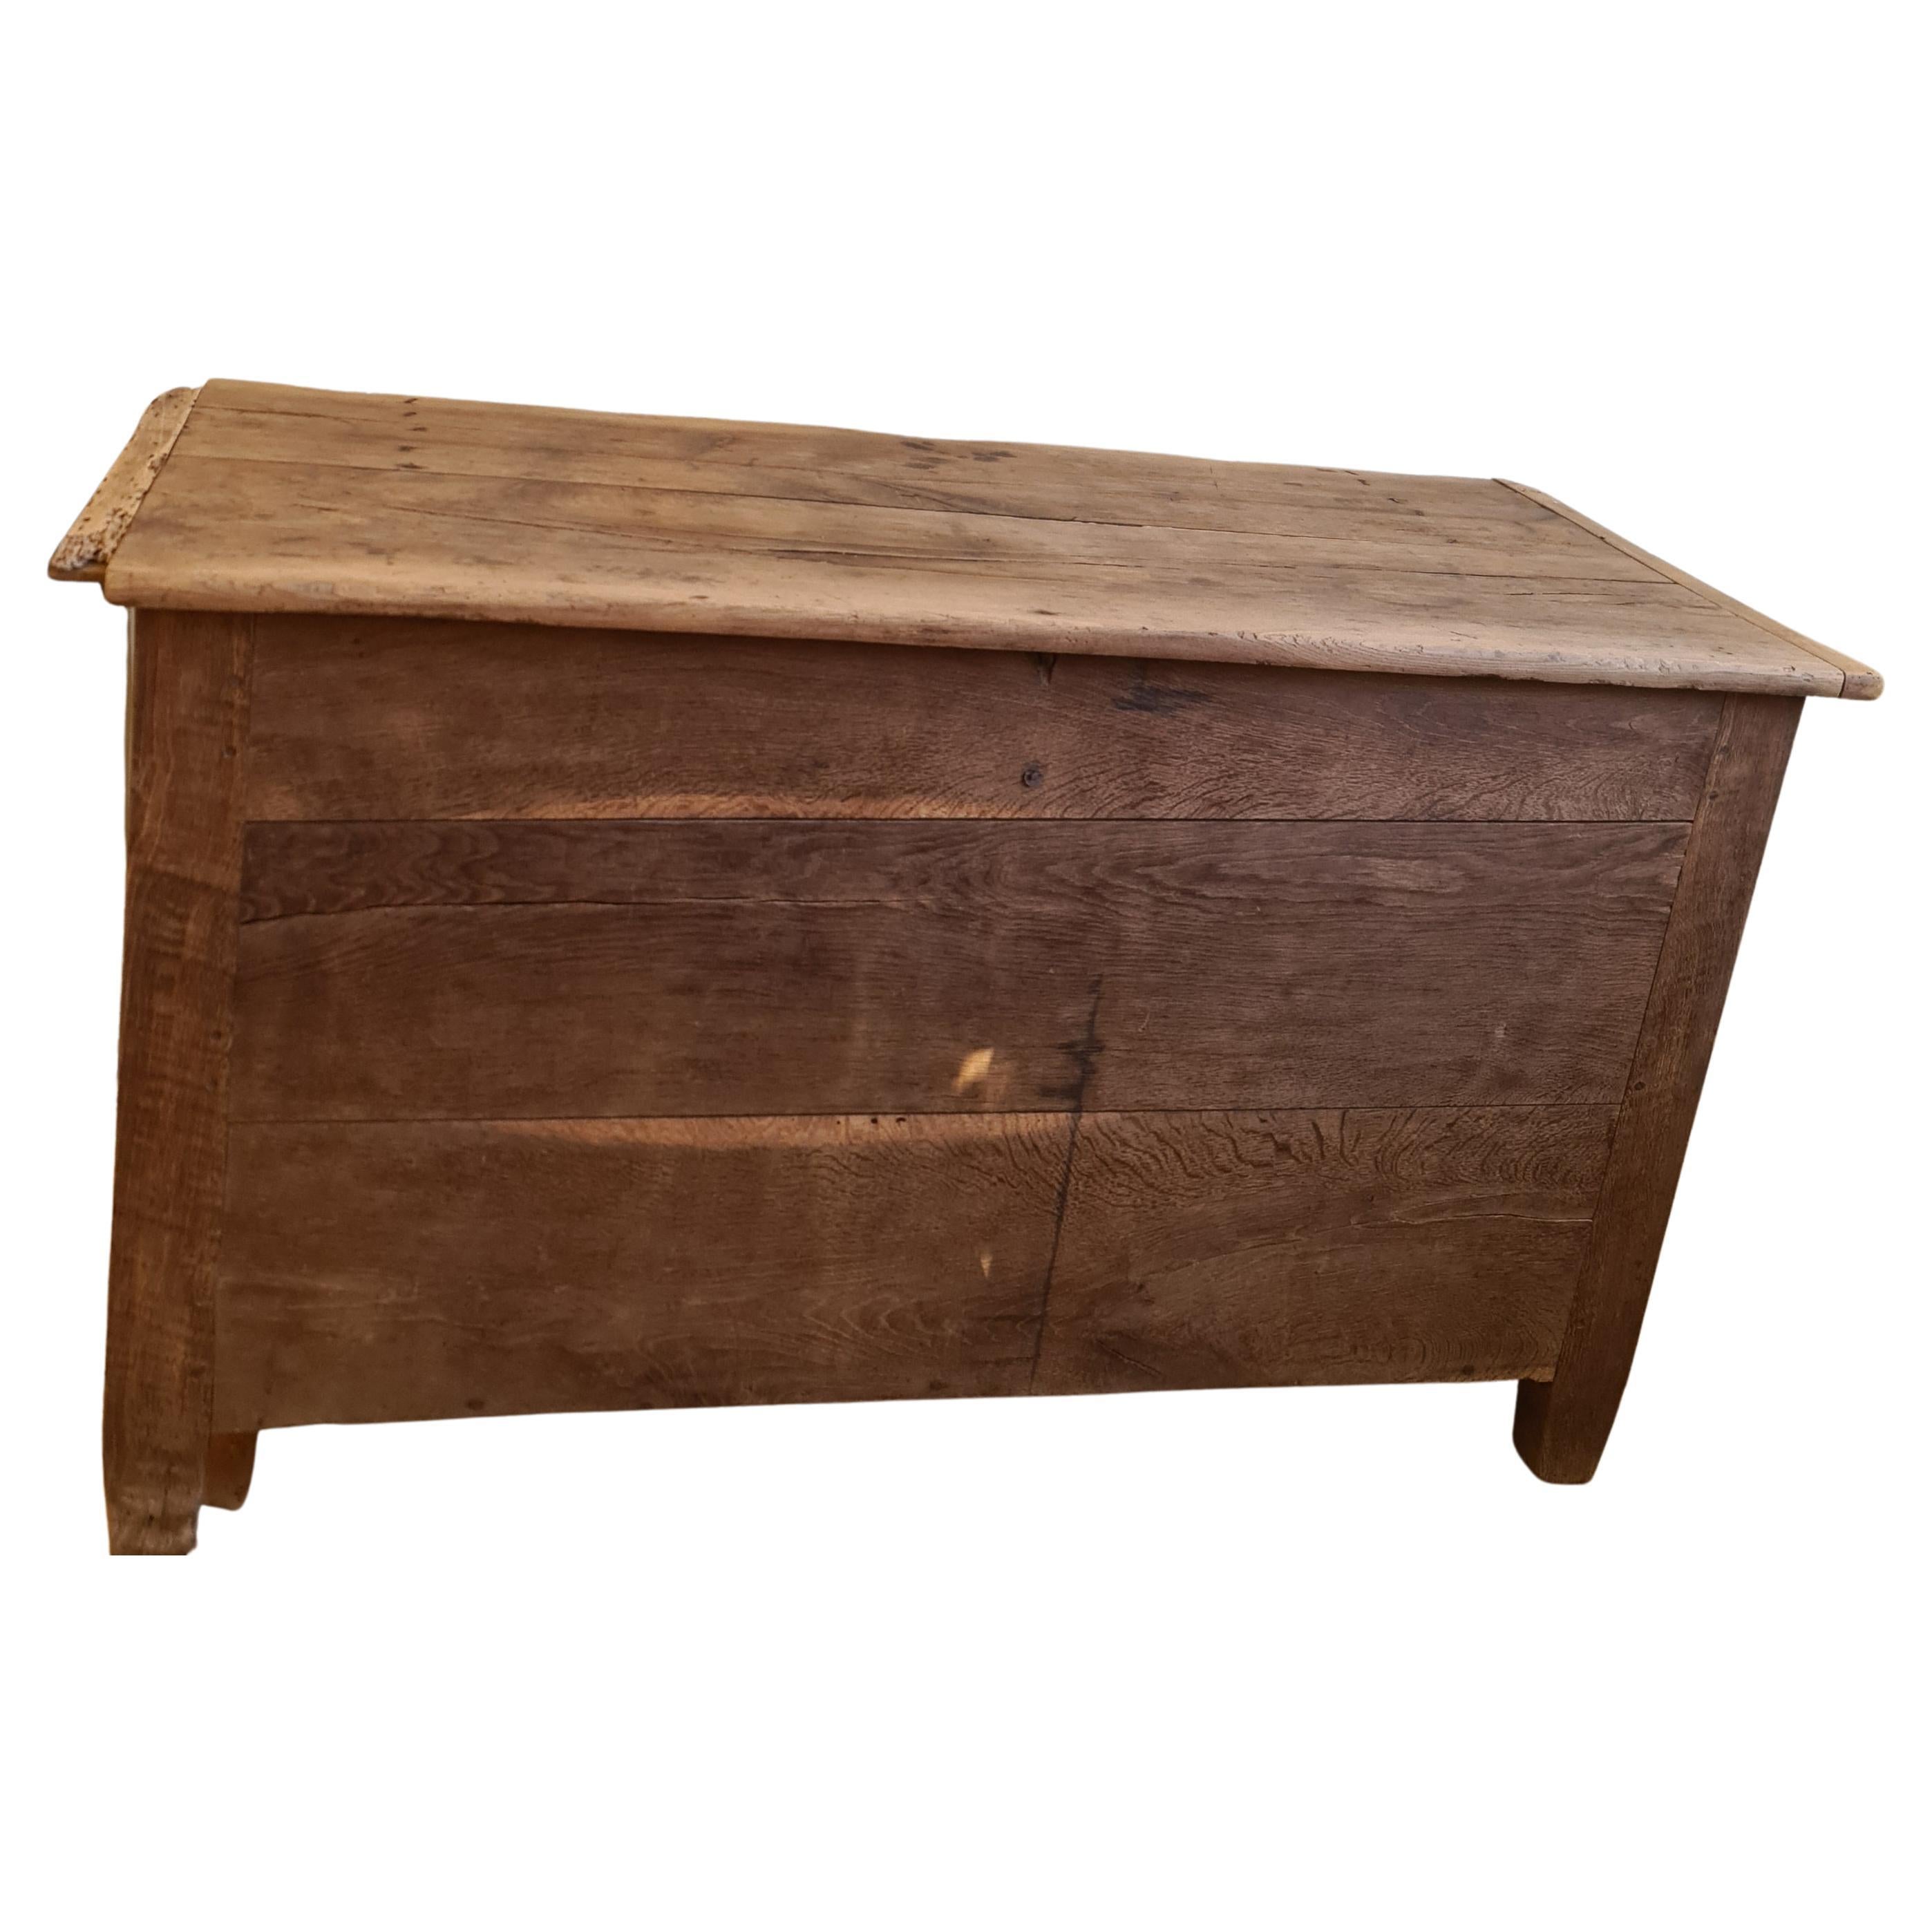 19th century blanket chest For Sale